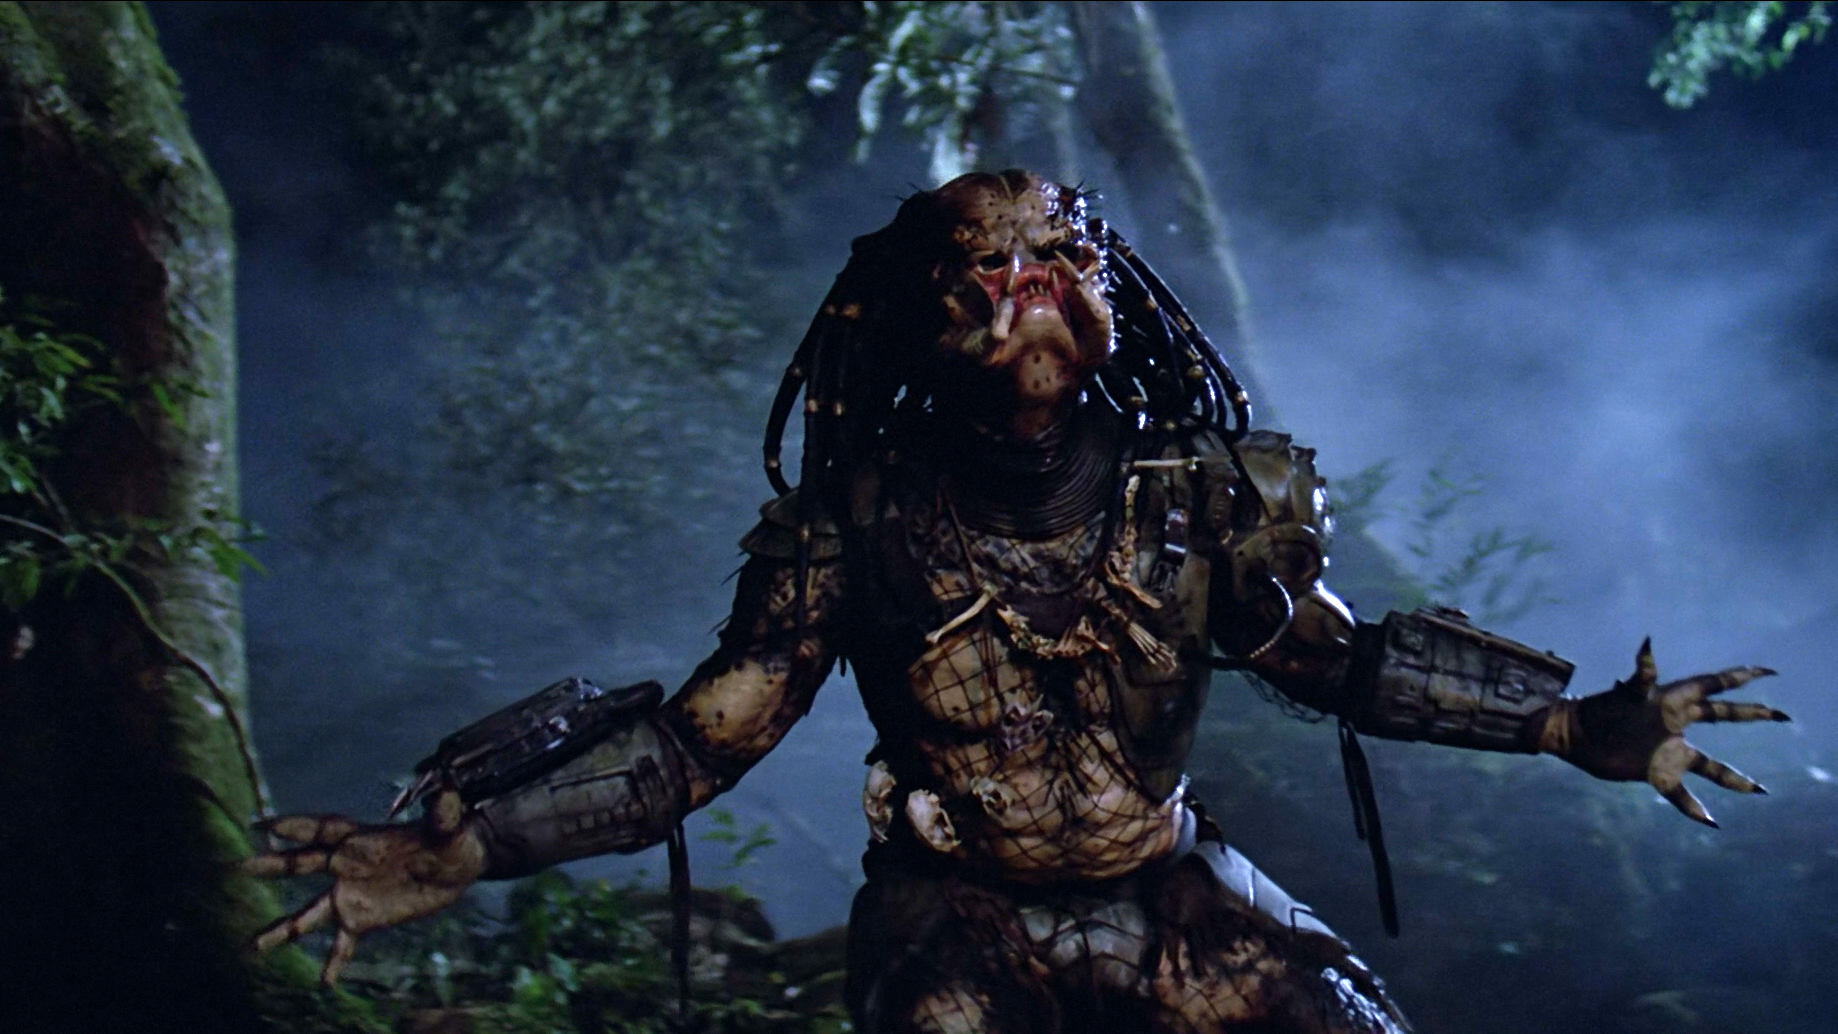 The most terrifying monsters in horror movies.